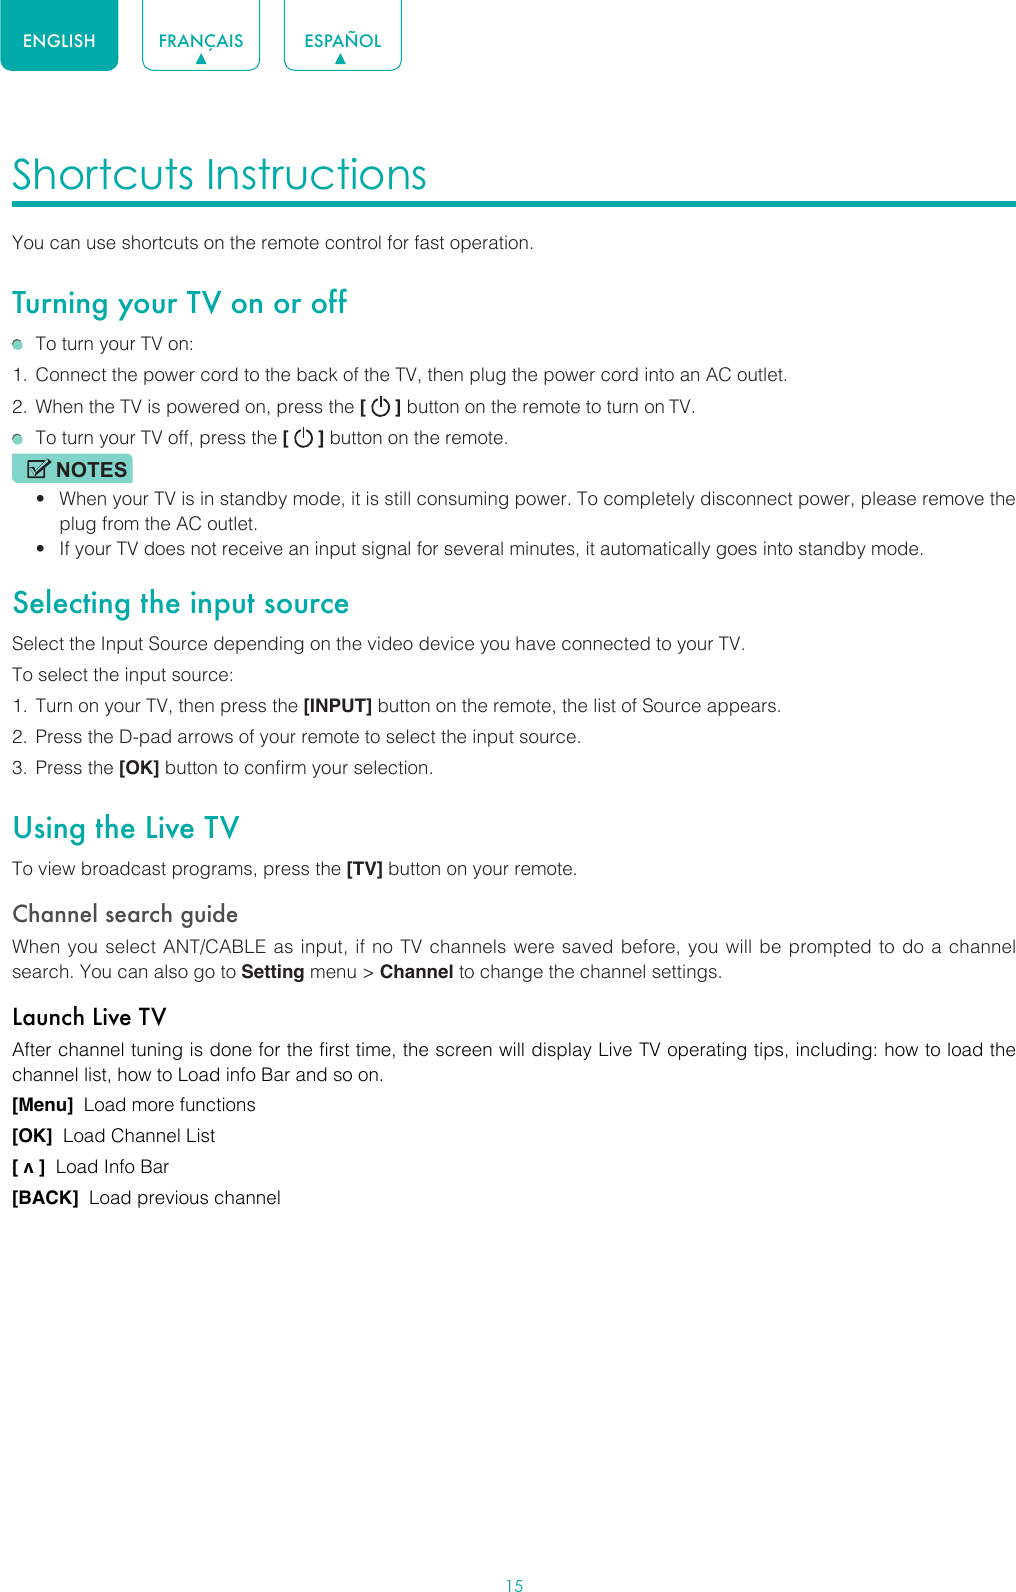 15ENGLISH FRANÇAIS ESPAÑOLShortcuts Instructions You can use shortcuts on the remote control for fast operation. Turning your TV on or off  To turn your TV on:1.  Connect the power cord to the back of the TV, then plug the power cord into an AC outlet.2.  When the TV is powered on, press the [   ] button on the remote to turn on TV.  To turn your TV off, press the [   ] button on the remote.NOTES• When your TV is in standby mode, it is still consuming power. To completely disconnect power, please remove the  plug from the AC outlet.• If your TV does not receive an input signal for several minutes, it automatically goes into standby mode.Selecting the input sourceSelect the Input Source depending on the video device you have connected to your TV.To select the input source:1.  Turn on your TV, then press the [INPUT] button on the remote, the list of Source appears.2.  Press the D-pad arrows of your remote to select the input source. 3.  Press the [OK] button to confirm your selection.Using the Live TVTo view broadcast programs, press the [TV] button on your remote.Channel search guideWhen you select ANT/CABLE as input, if no TV channels were saved before, you will be prompted to do a channel search. You can also go to Setting menu &gt; Channel to change the channel settings.Launch Live TVAfter channel tuning is done for the first time, the screen will display Live TV operating tips, including: how to load the channel list, how to Load info Bar and so on. [Menu]  Load more functions[OK]  Load Channel List[ v ]  Load Info Bar[BACK]  Load previous channel